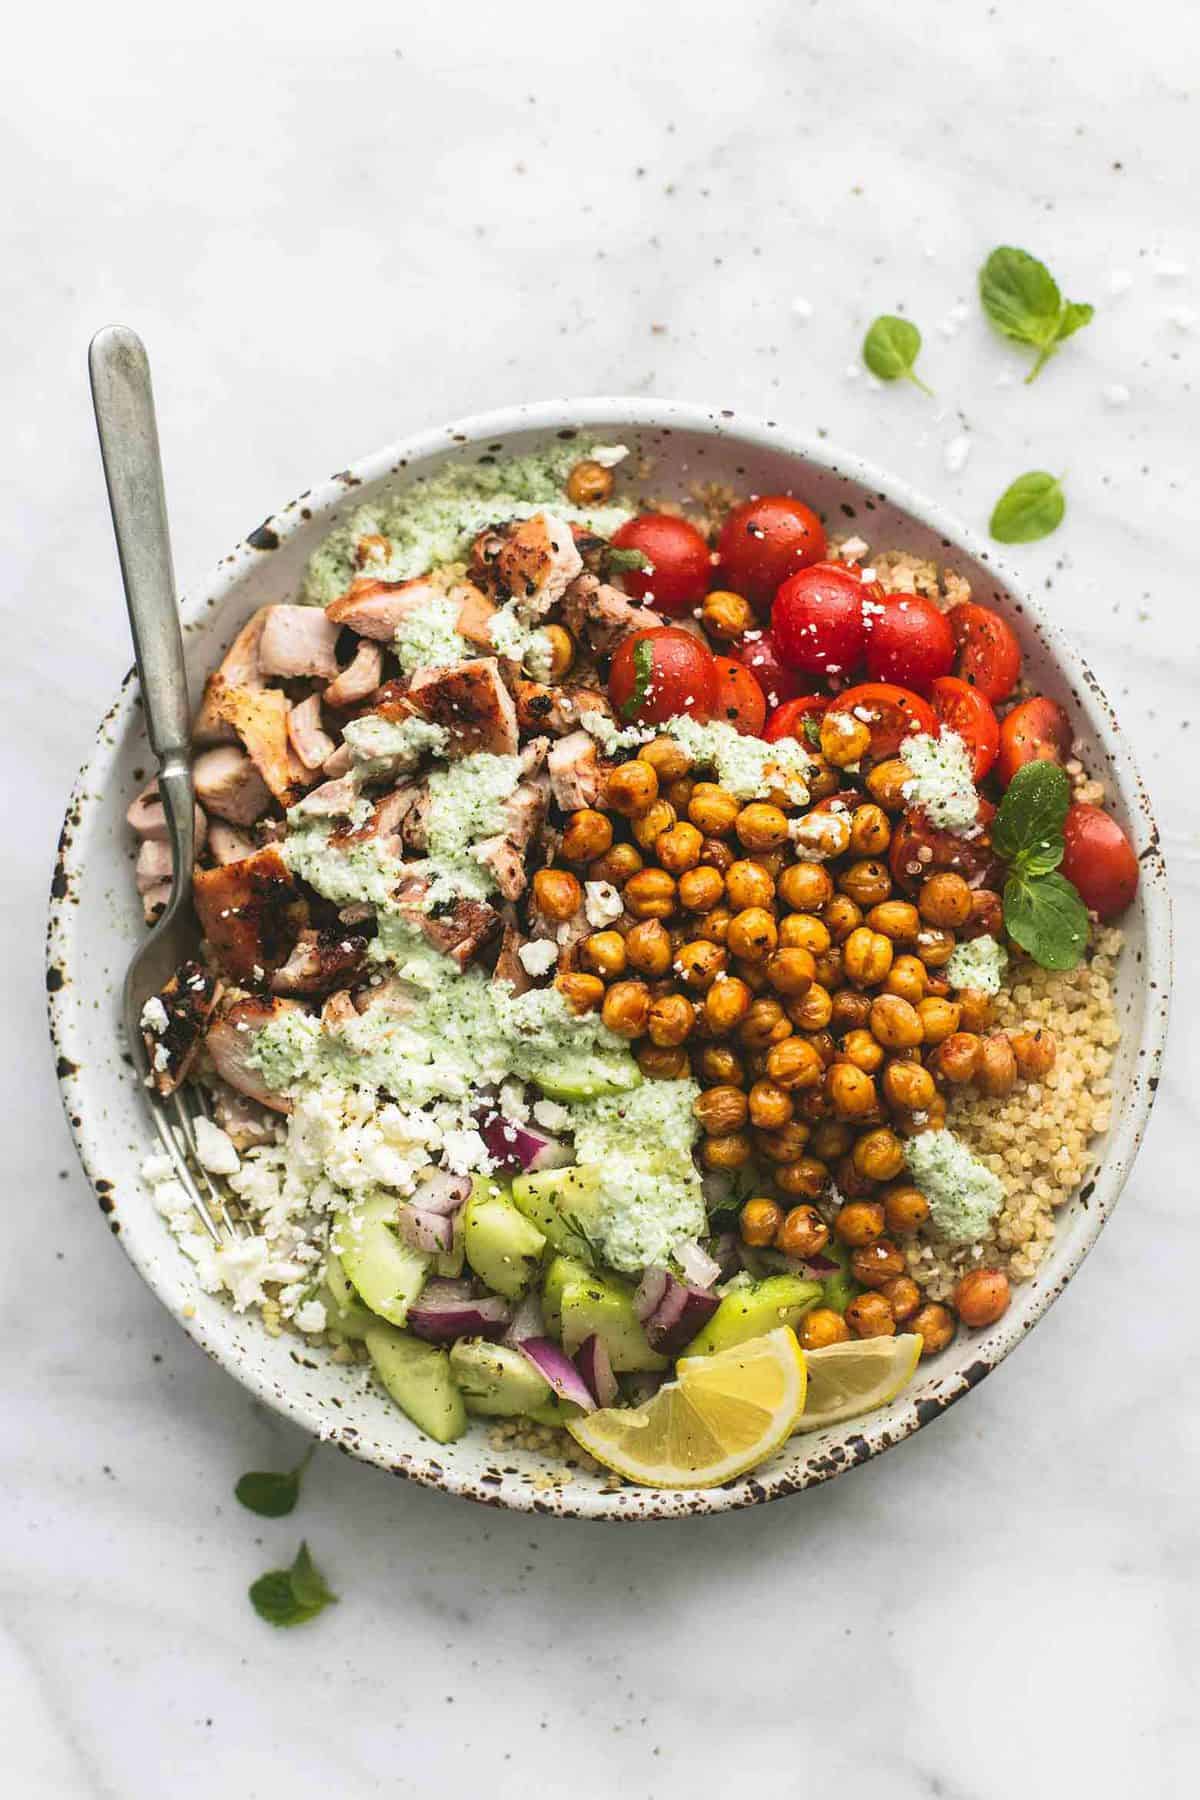 Grilled Chicken Meal Prep Bowls 4 Creative Ways for Clean Eating